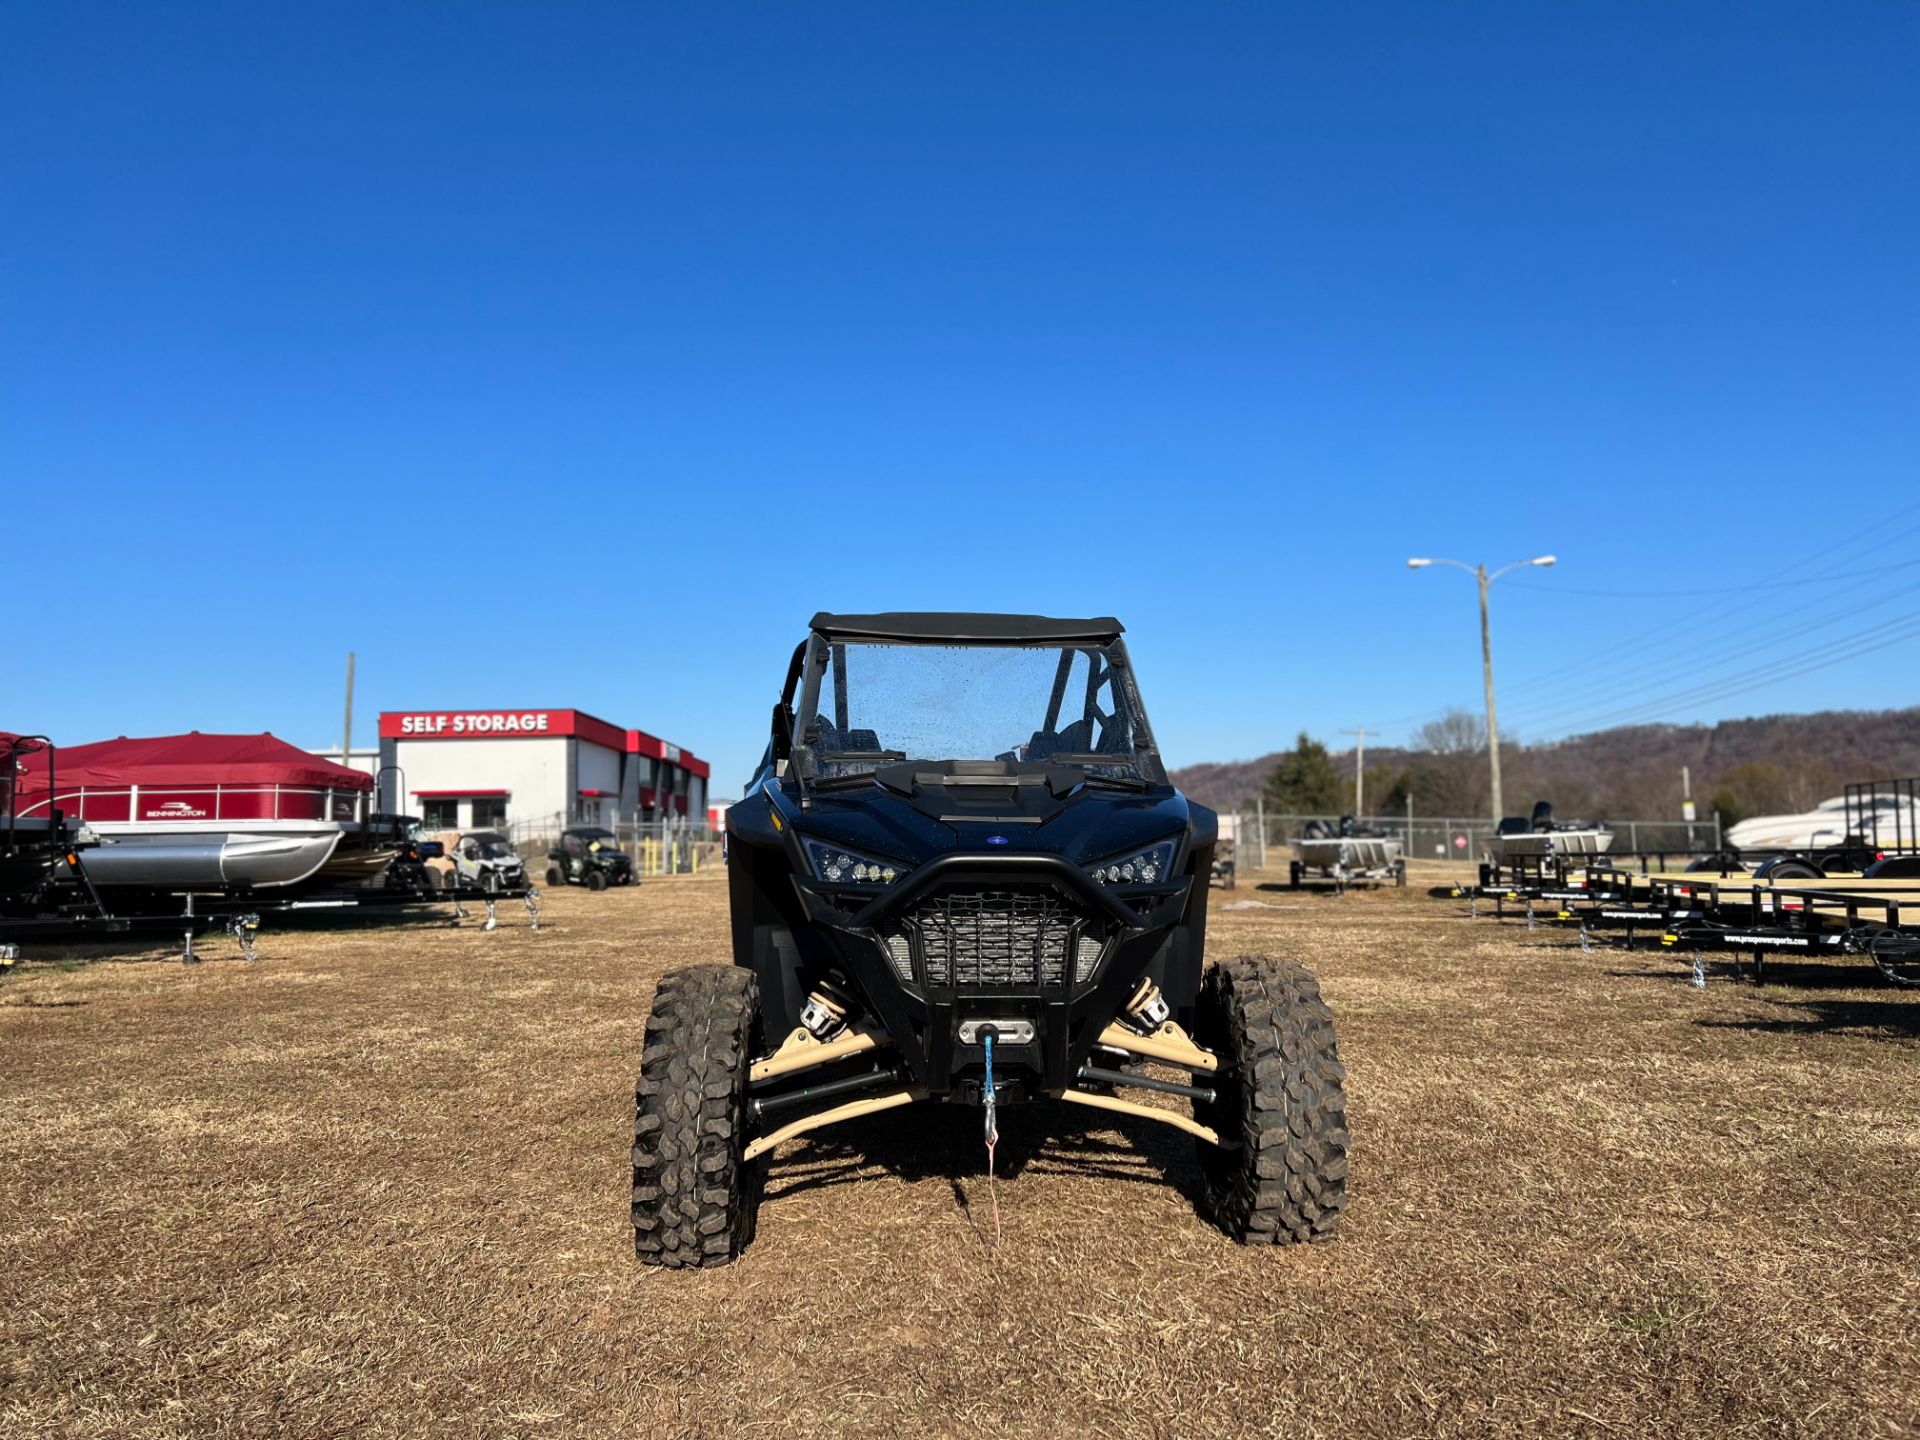 2022 Polaris RZR PRO XP Ultimate in Ooltewah, Tennessee - Photo 9